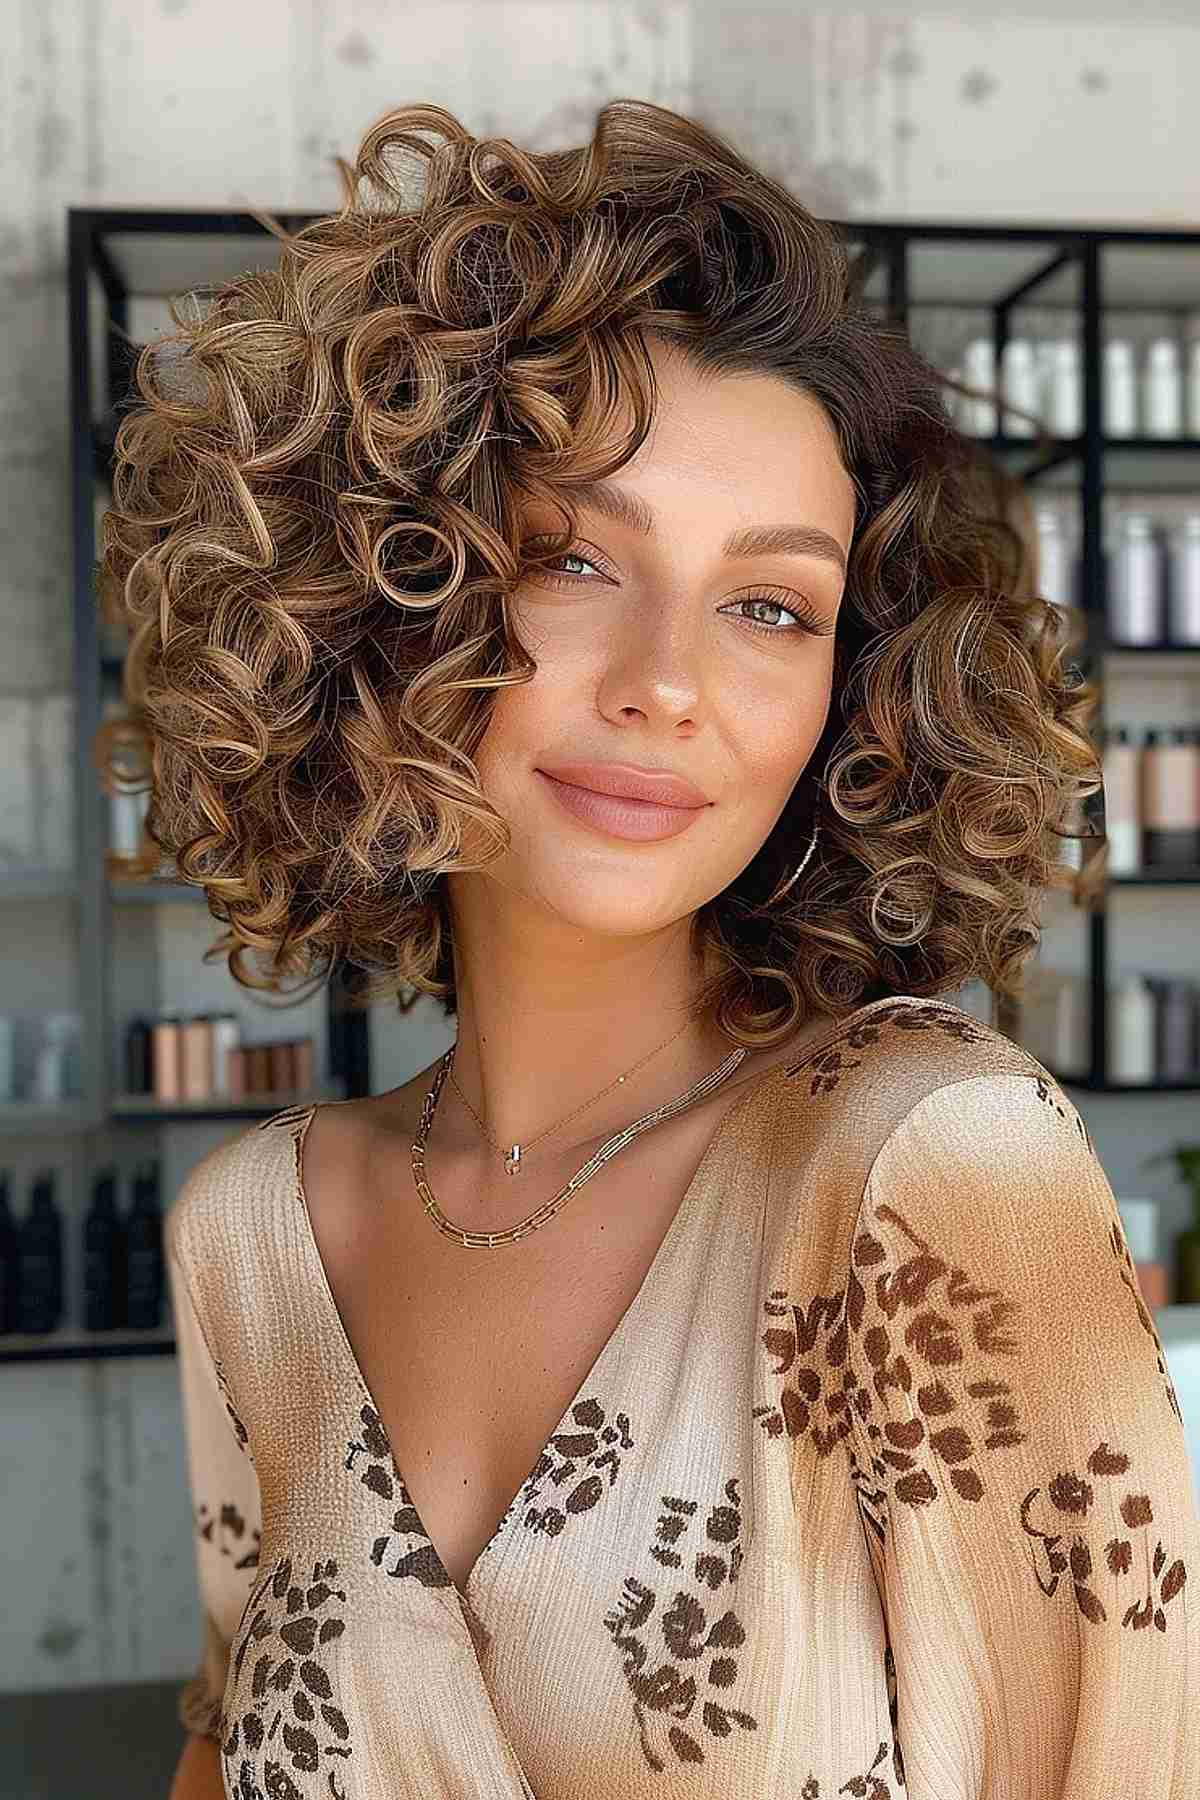 Fluffy curly hairstyle for women with tight, voluminous curls